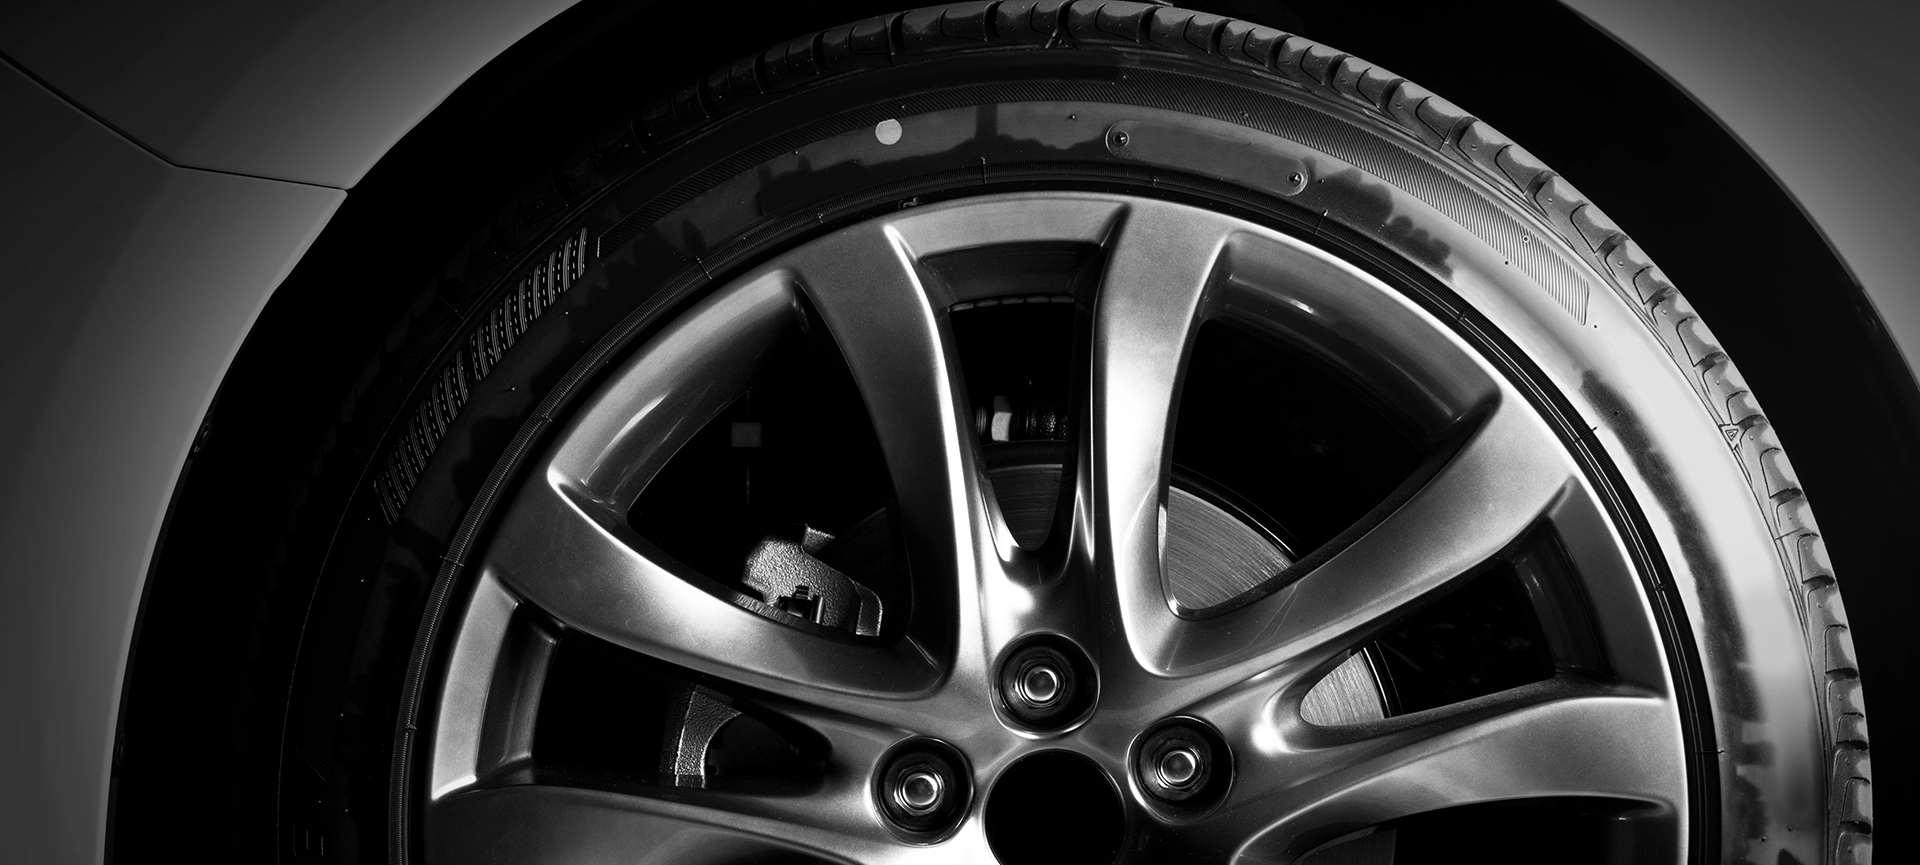 Restoring Shine: How to Fix Scratched Chrome Rims